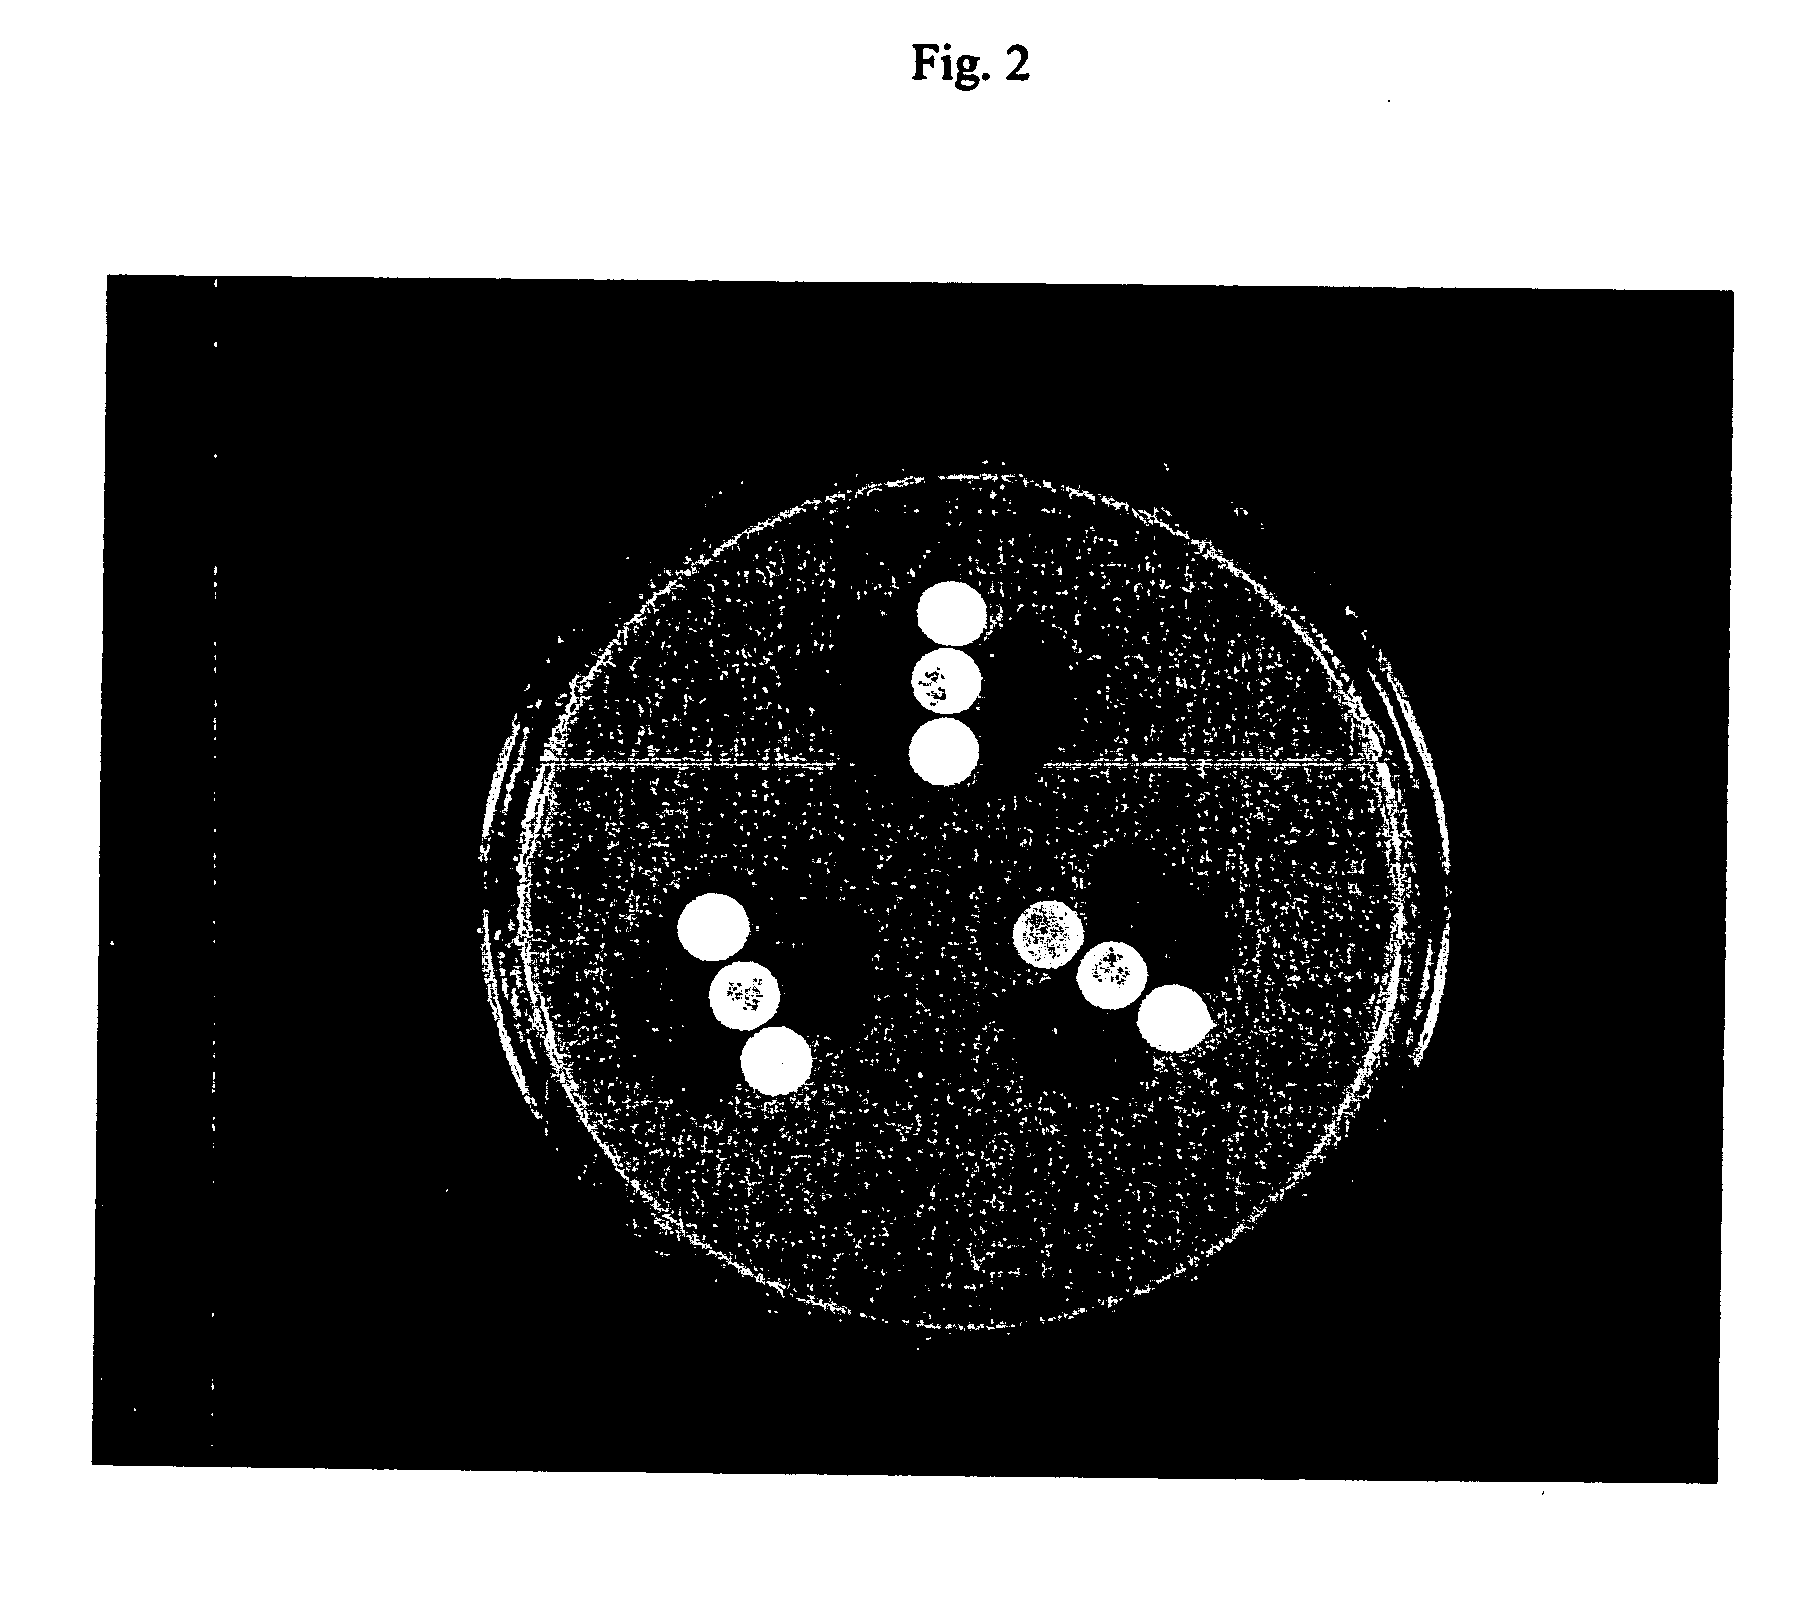 Device and method for detecting antibiotic-inactivating enzymes